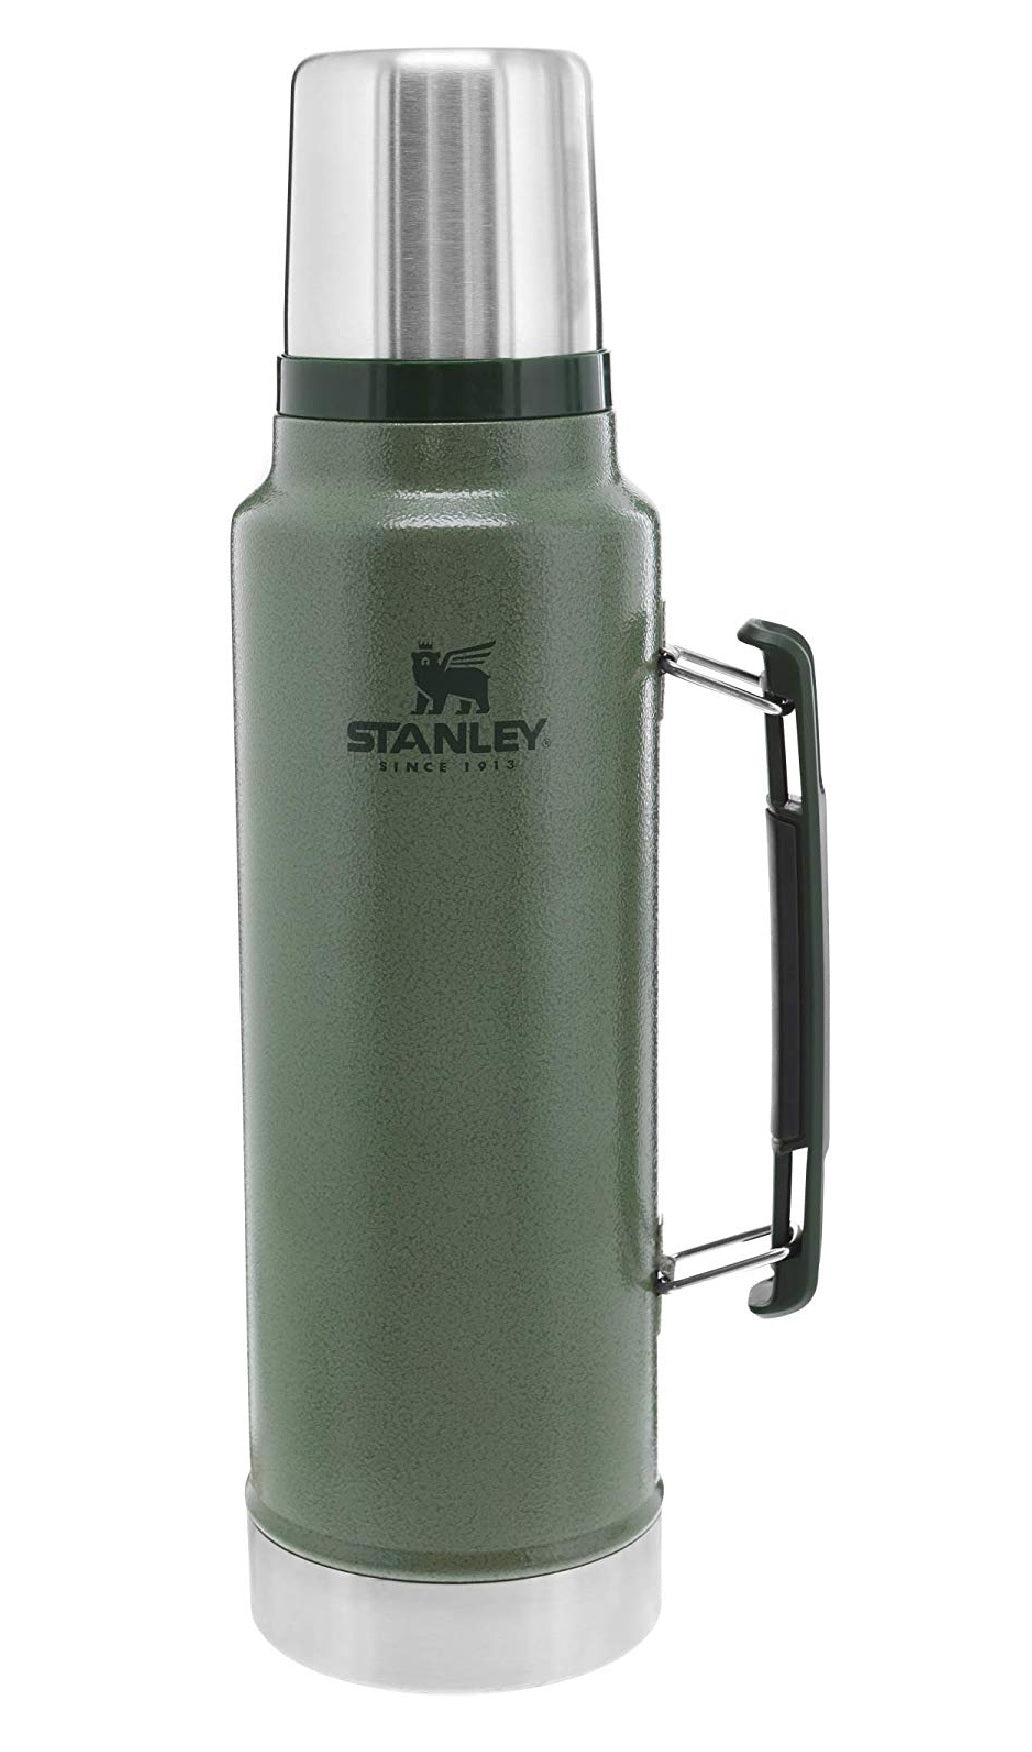 Stanley The Heritage Classic Bottle 1 L *Green* (10-01959-009) New